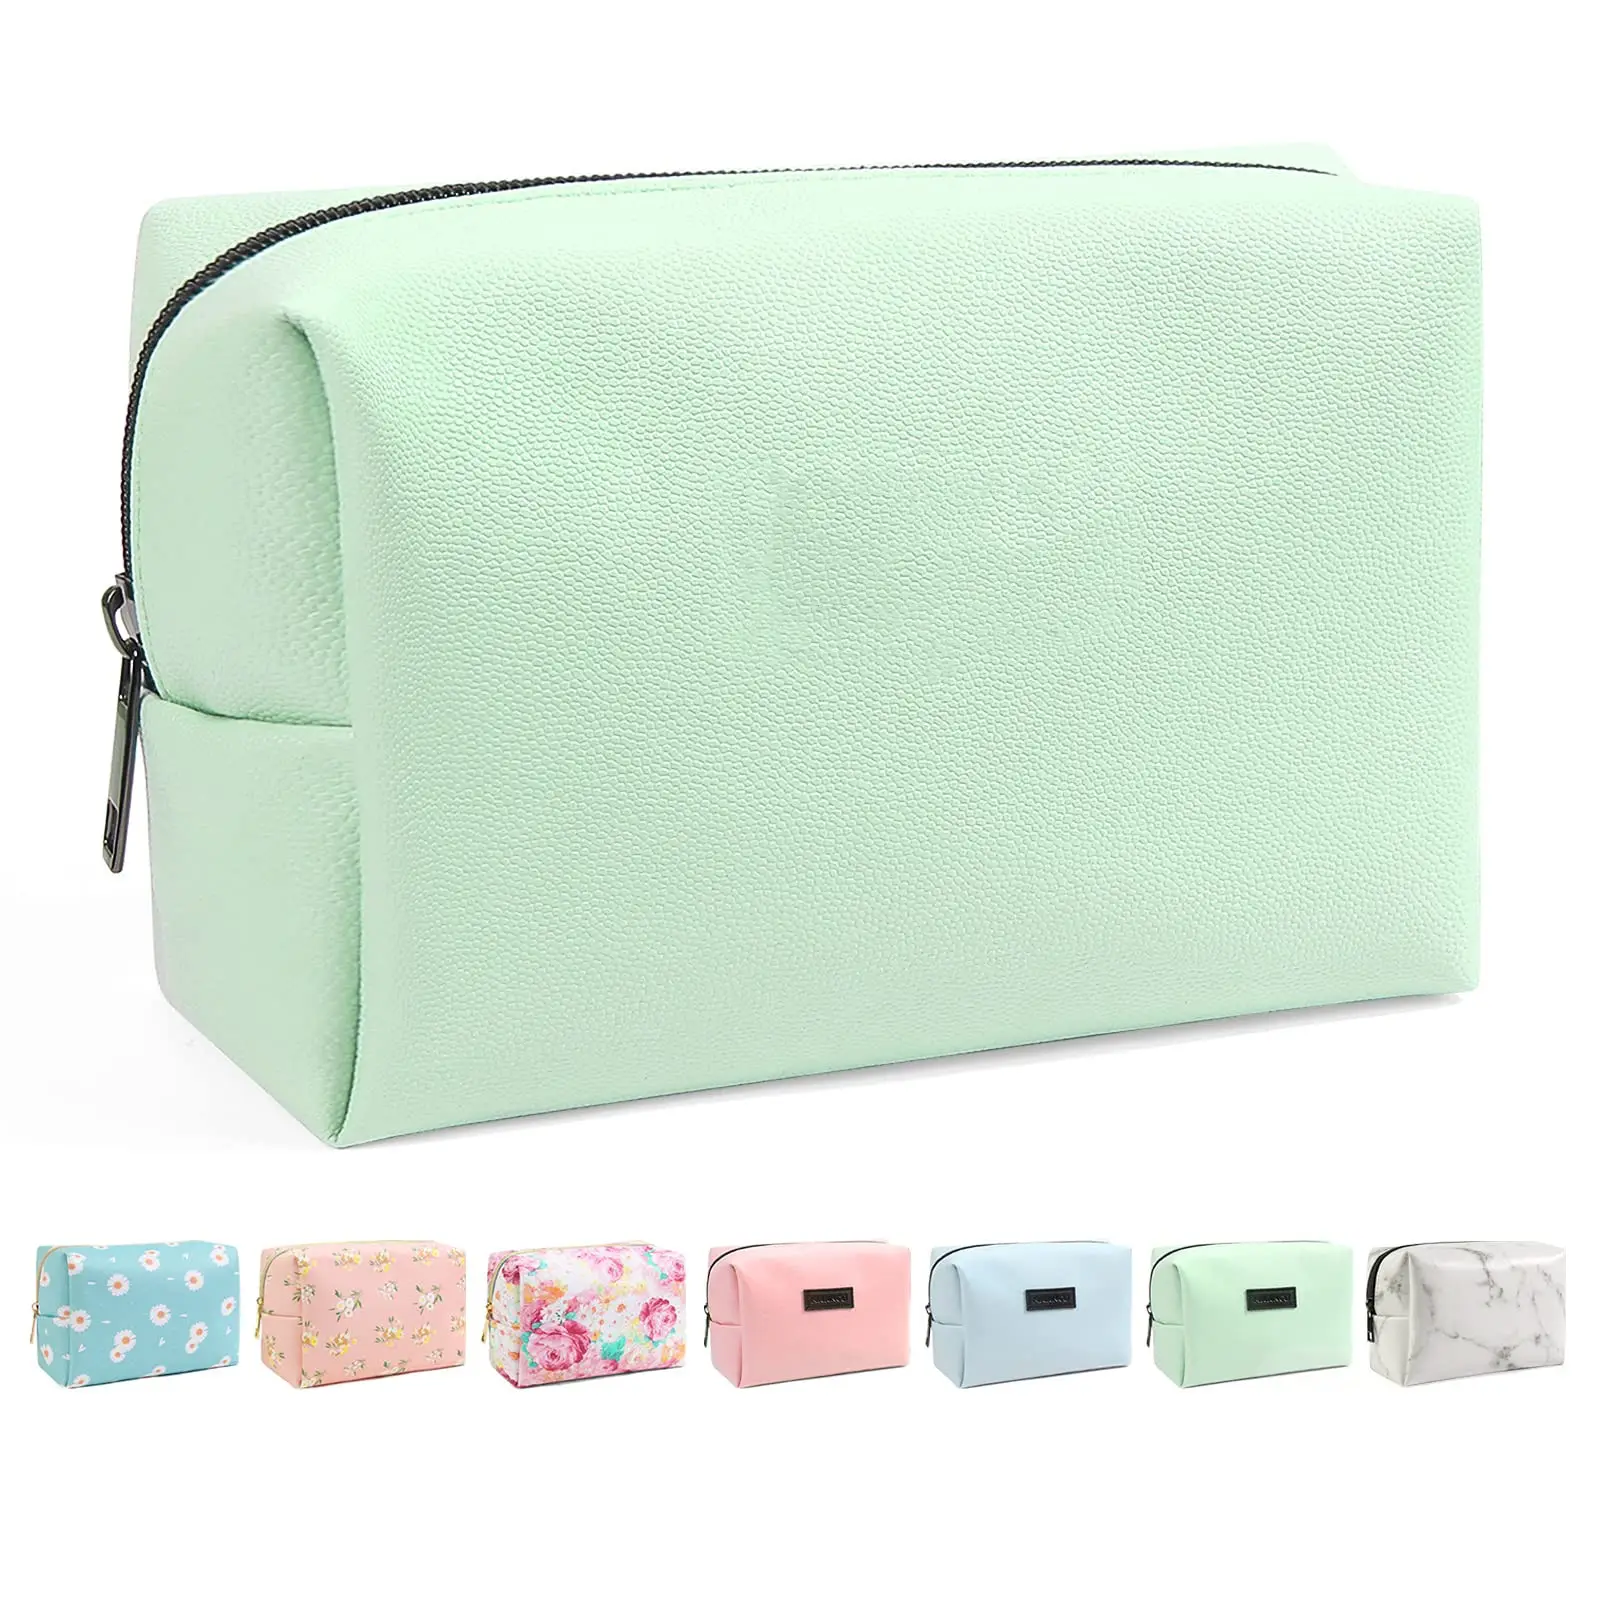 PU Leather Portable Toiletry Bags Waterproof Travel Make Up Bags for Women Small Medium Large Cosmetic Organizer Bags